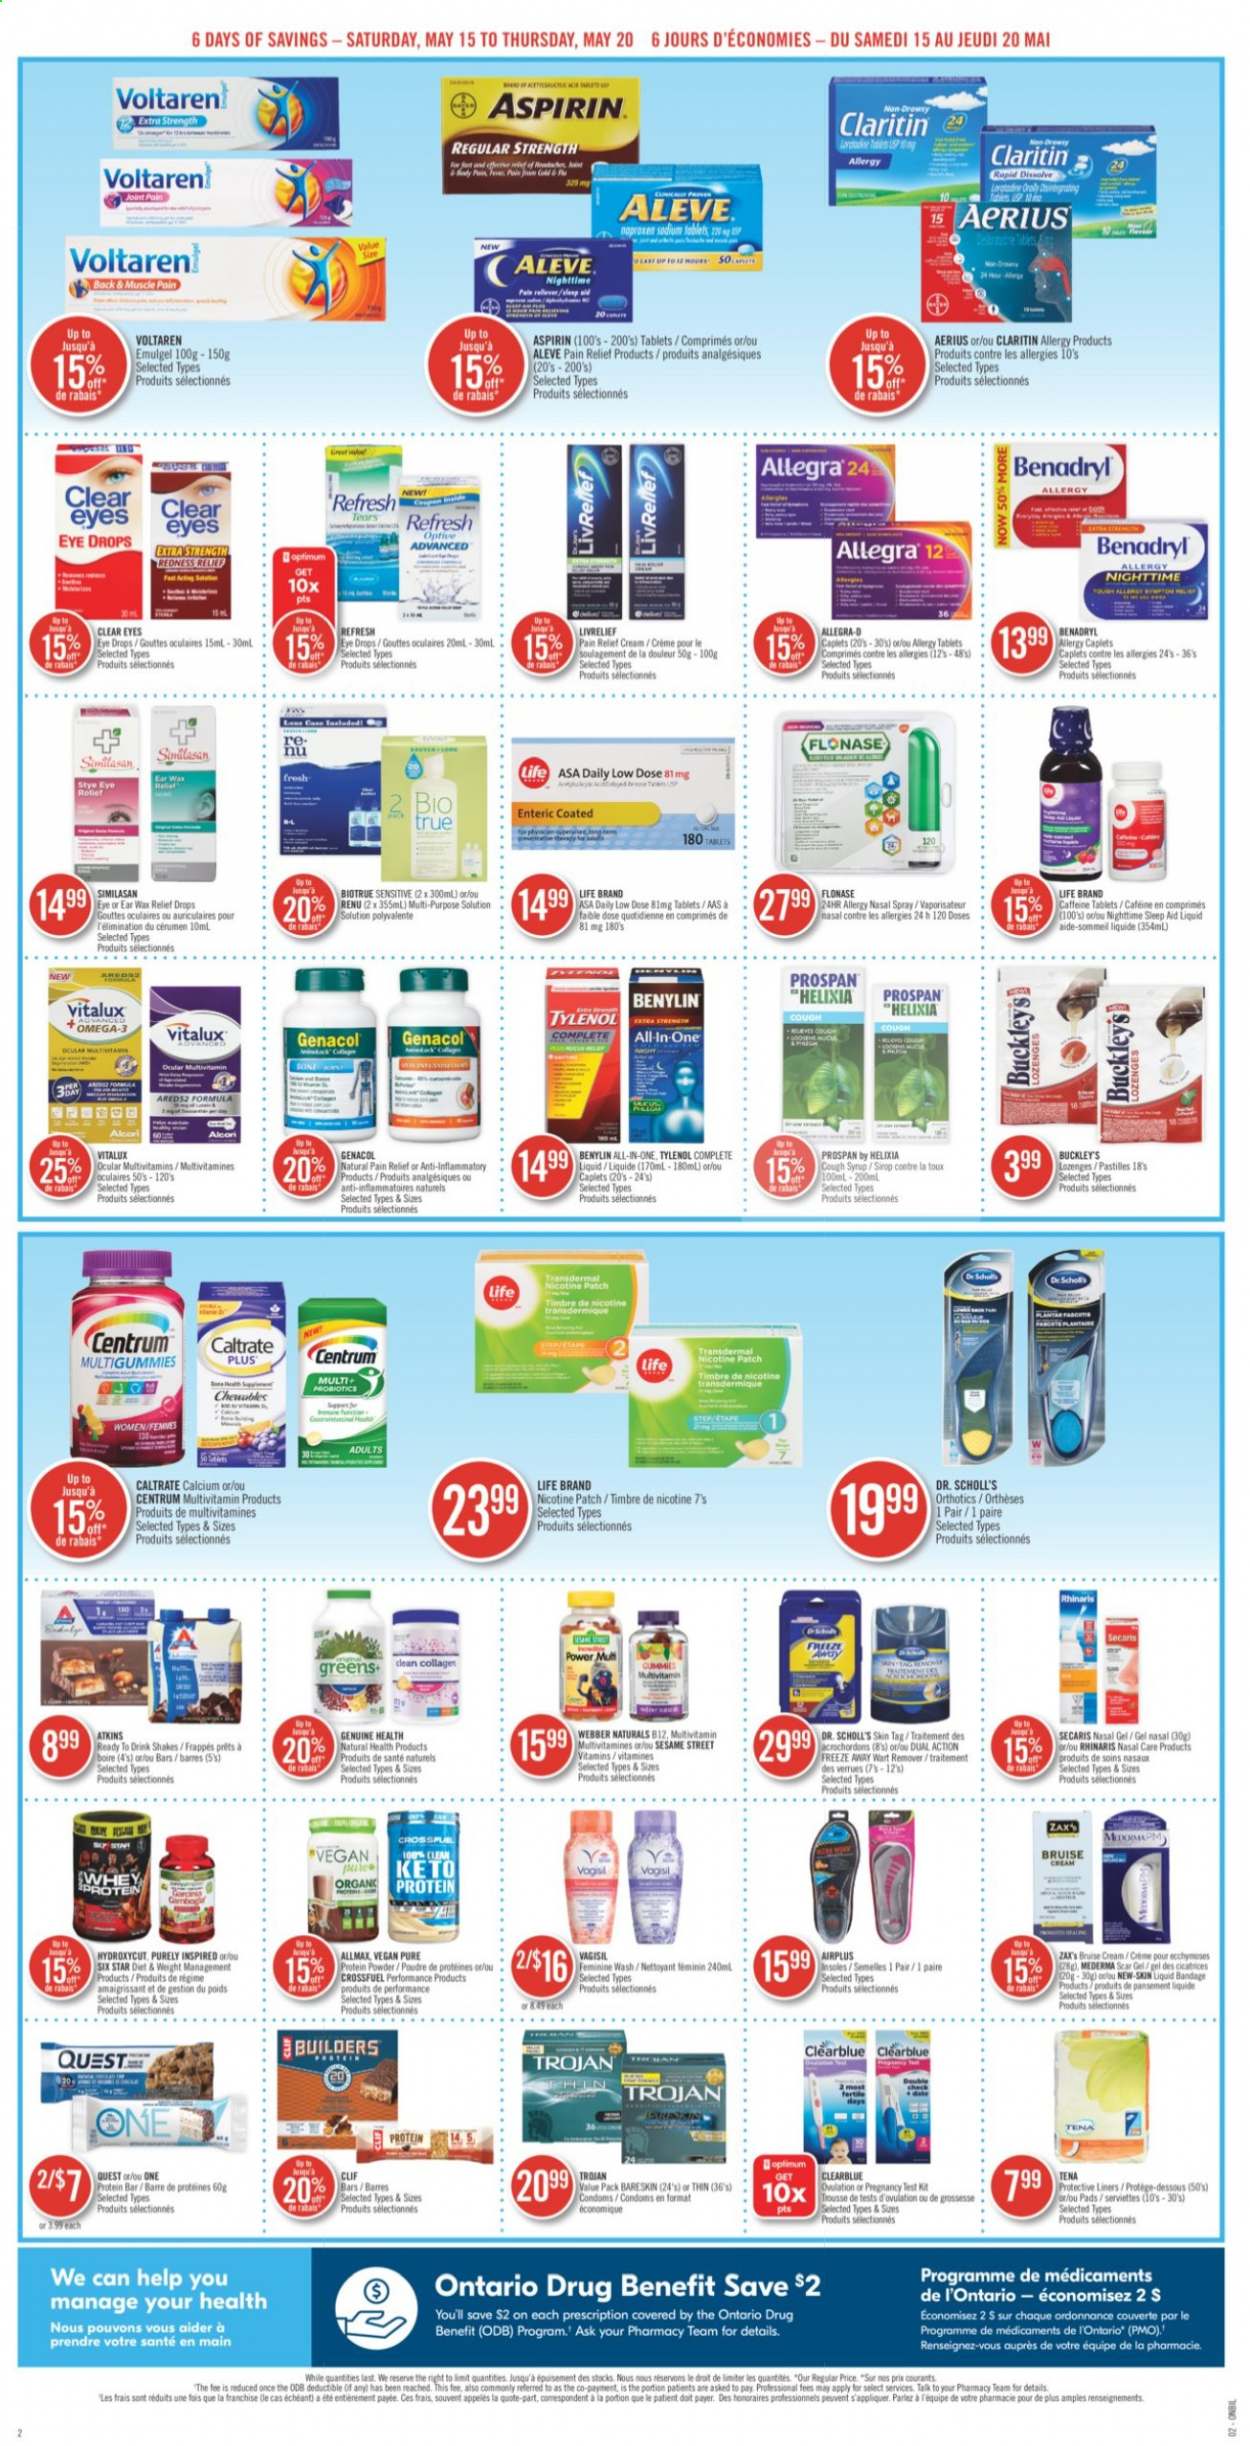 thumbnail - Shoppers Drug Mart Flyer - May 15, 2021 - May 20, 2021 - Sales products - pastilles, Sesame Street, protein bar, syrup, Cif, pain relief, Aleve, multivitamin, Tylenol, probiotics, Omega-3, Biotrue, eye drops, whey protein, Low Dose, aspirin, Centrum, Benylin, nasal spray, Dr. Scholl's. Page 2.